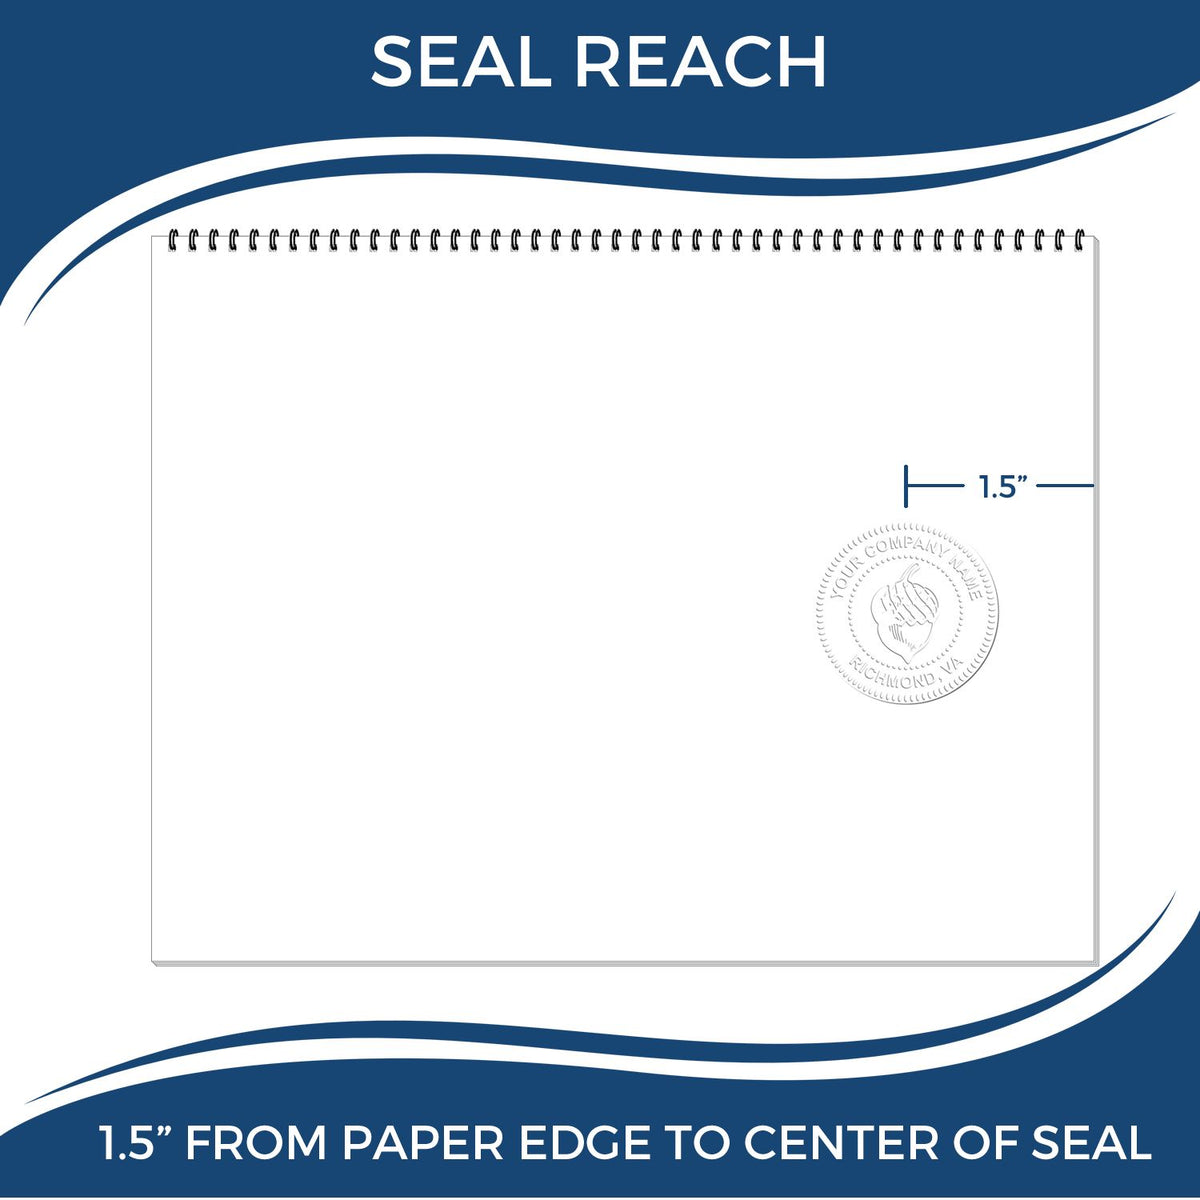 An infographic showing the seal reach which is represented by a ruler and a miniature seal image of the State of Colorado Soft Land Surveyor Embossing Seal